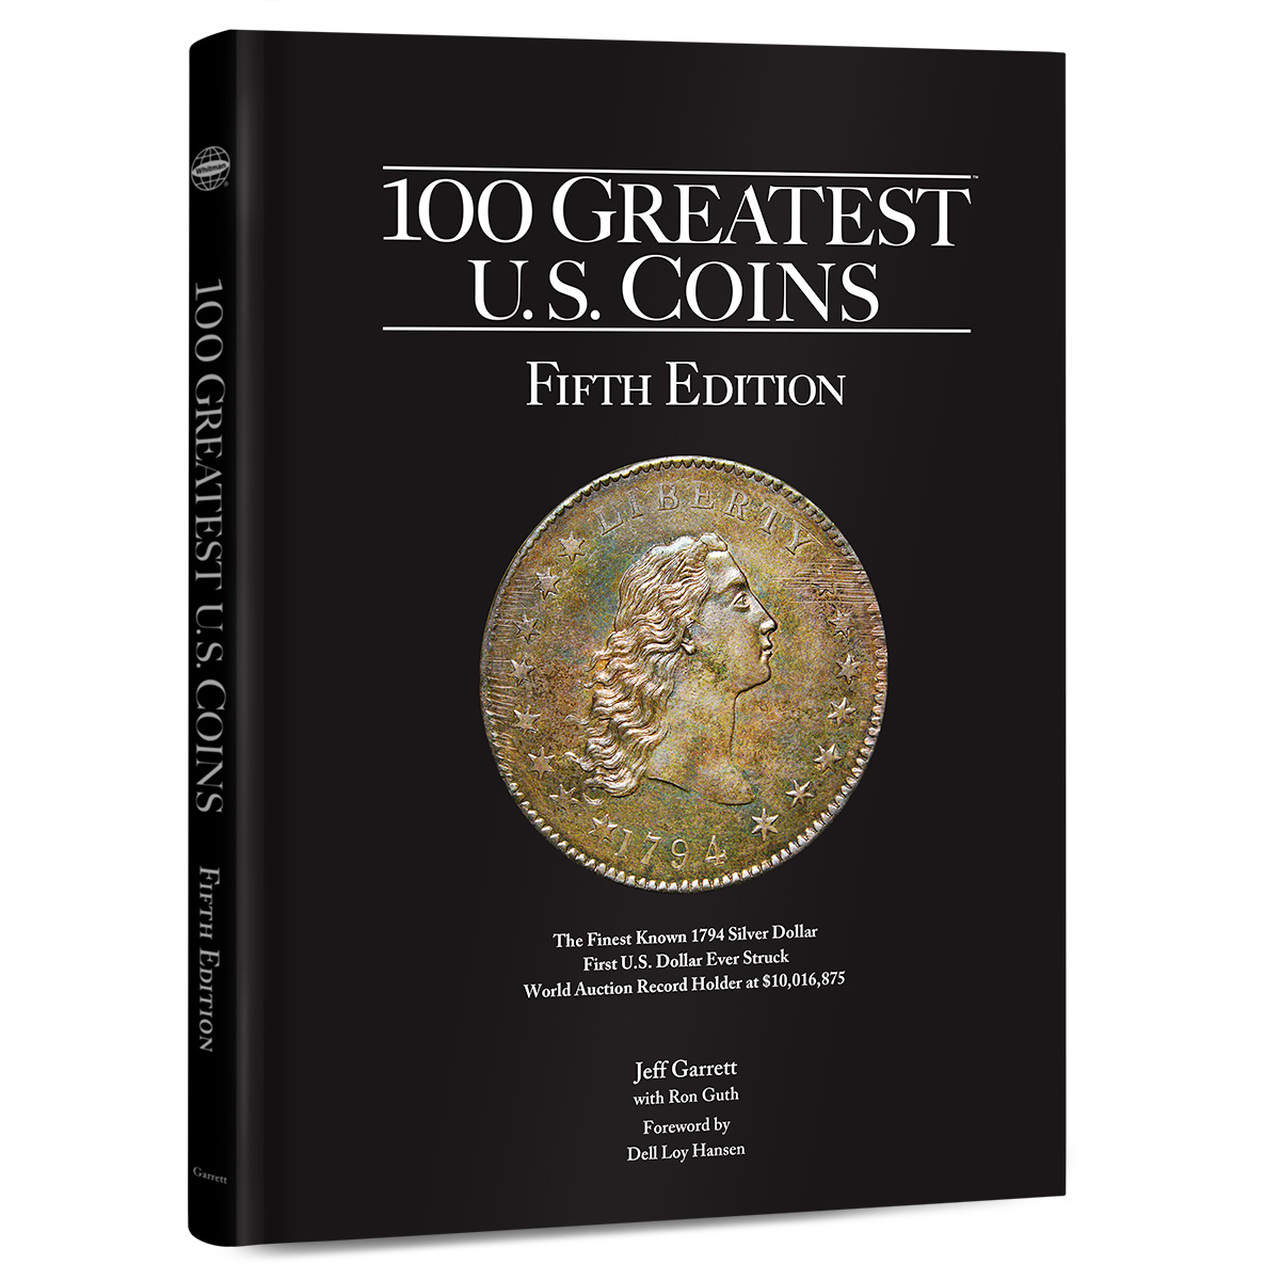 100 Greatest U.S. Coins - Fifth Edition by Jeff Garrett with Ron Guth